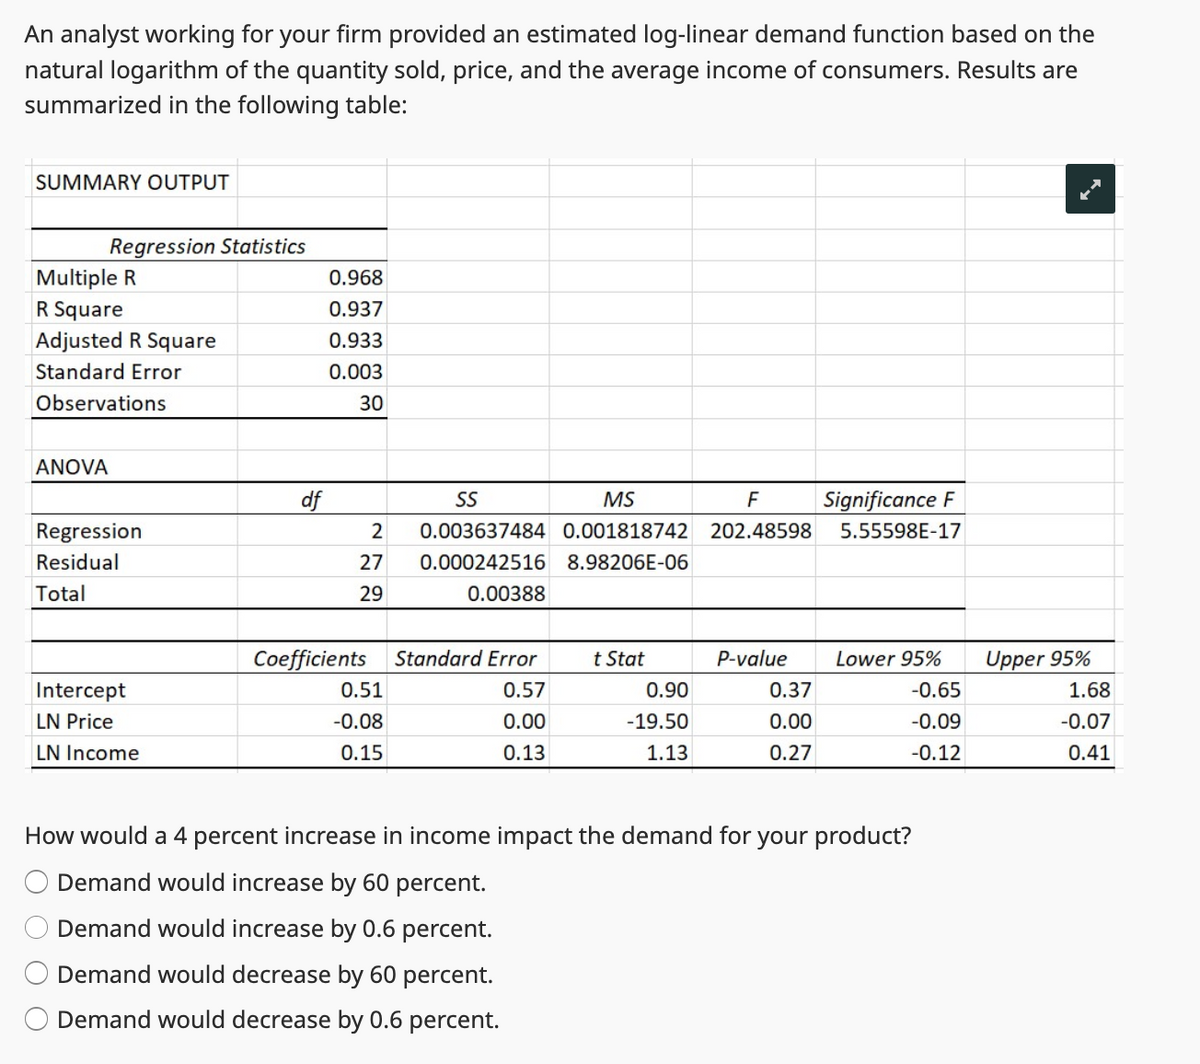 An analyst working for your firm provided an estimated log-linear demand function based on the
natural logarithm of the quantity sold, price, and the average income of consumers. Results are
summarized in the following table:
SUMMARY OUTPUT
Regression Statistics
Multiple R
R Square
Adjusted R Square
Standard Error
Observations
ANOVA
Regression
Residual
Total
Intercept
LN Price
LN Income
df
0.968
0.937
0.933
0.003
30
SS
MS
F
2 0.003637484 0.001818742 202.48598
0.000242516 8.98206E-06
27
29
0.00388
Coefficients Standard Error
0.57
0.00
0.13
0.51
-0.08
0.15
t Stat
0.90
-19.50
1.13
P-value
0.37
0.00
0.27
Significance F
5.55598E-17
Lower 95%
-0.65
-0.09
-0.12
How would a 4 percent increase in income impact the demand for your product?
Demand would increase by 60 percent.
Demand would increase by 0.6 percent.
Demand would decrease by 60 percent.
Demand would decrease by 0.6 percent.
Upper 95%
1.68
-0.07
0.41